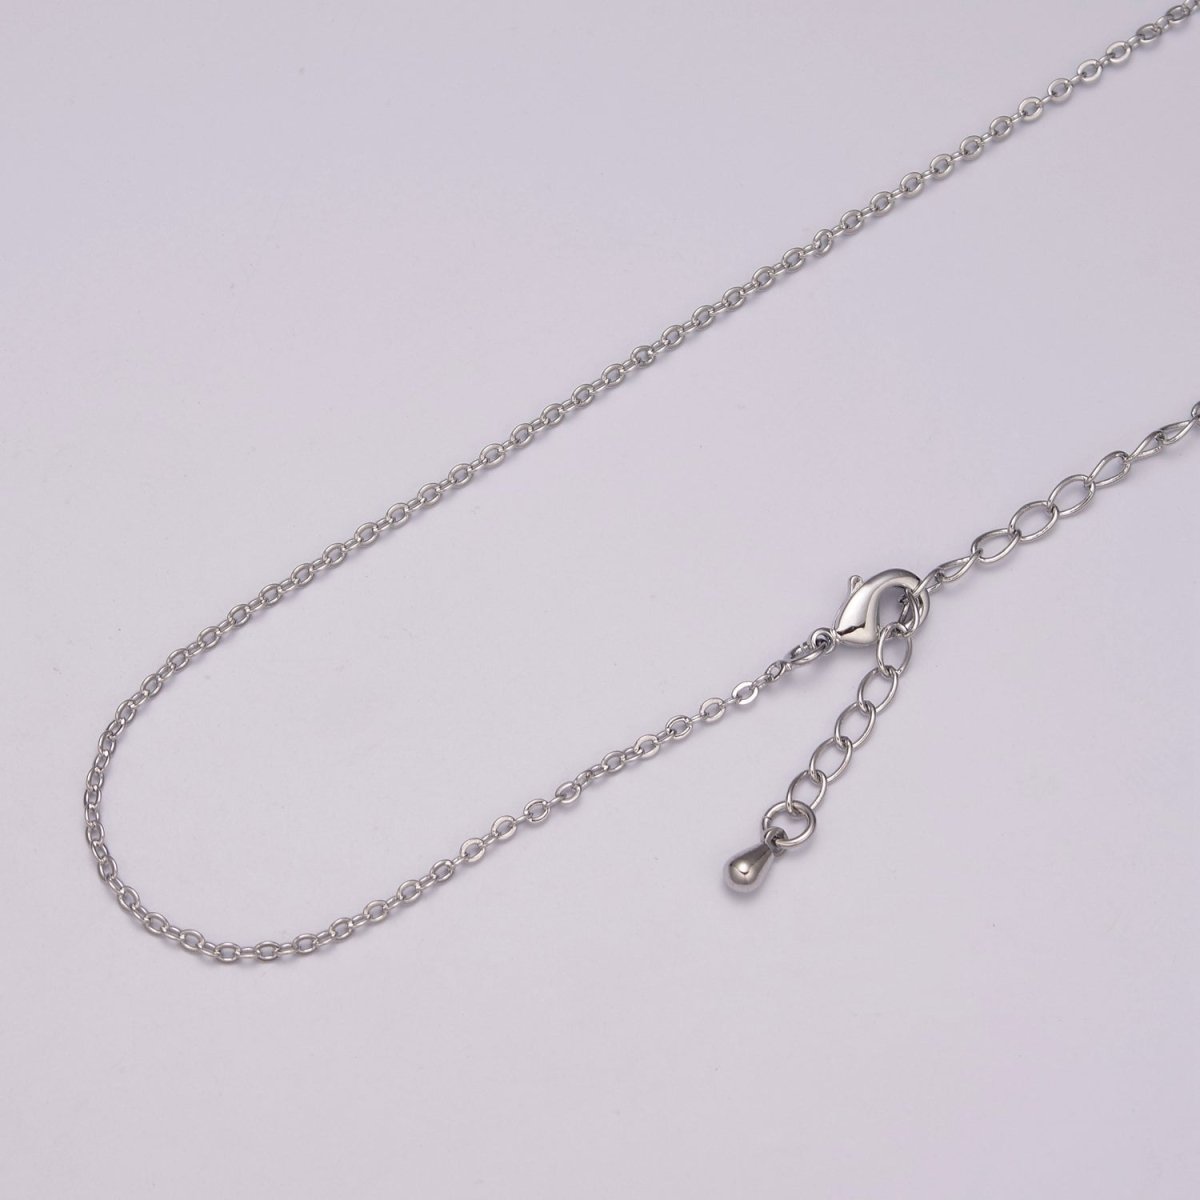 White Gold Filled 1.4mm Dainty Cable Chain 16 Inch Choker Chain Necklace w. Extender | WA-439 - DLUXCA